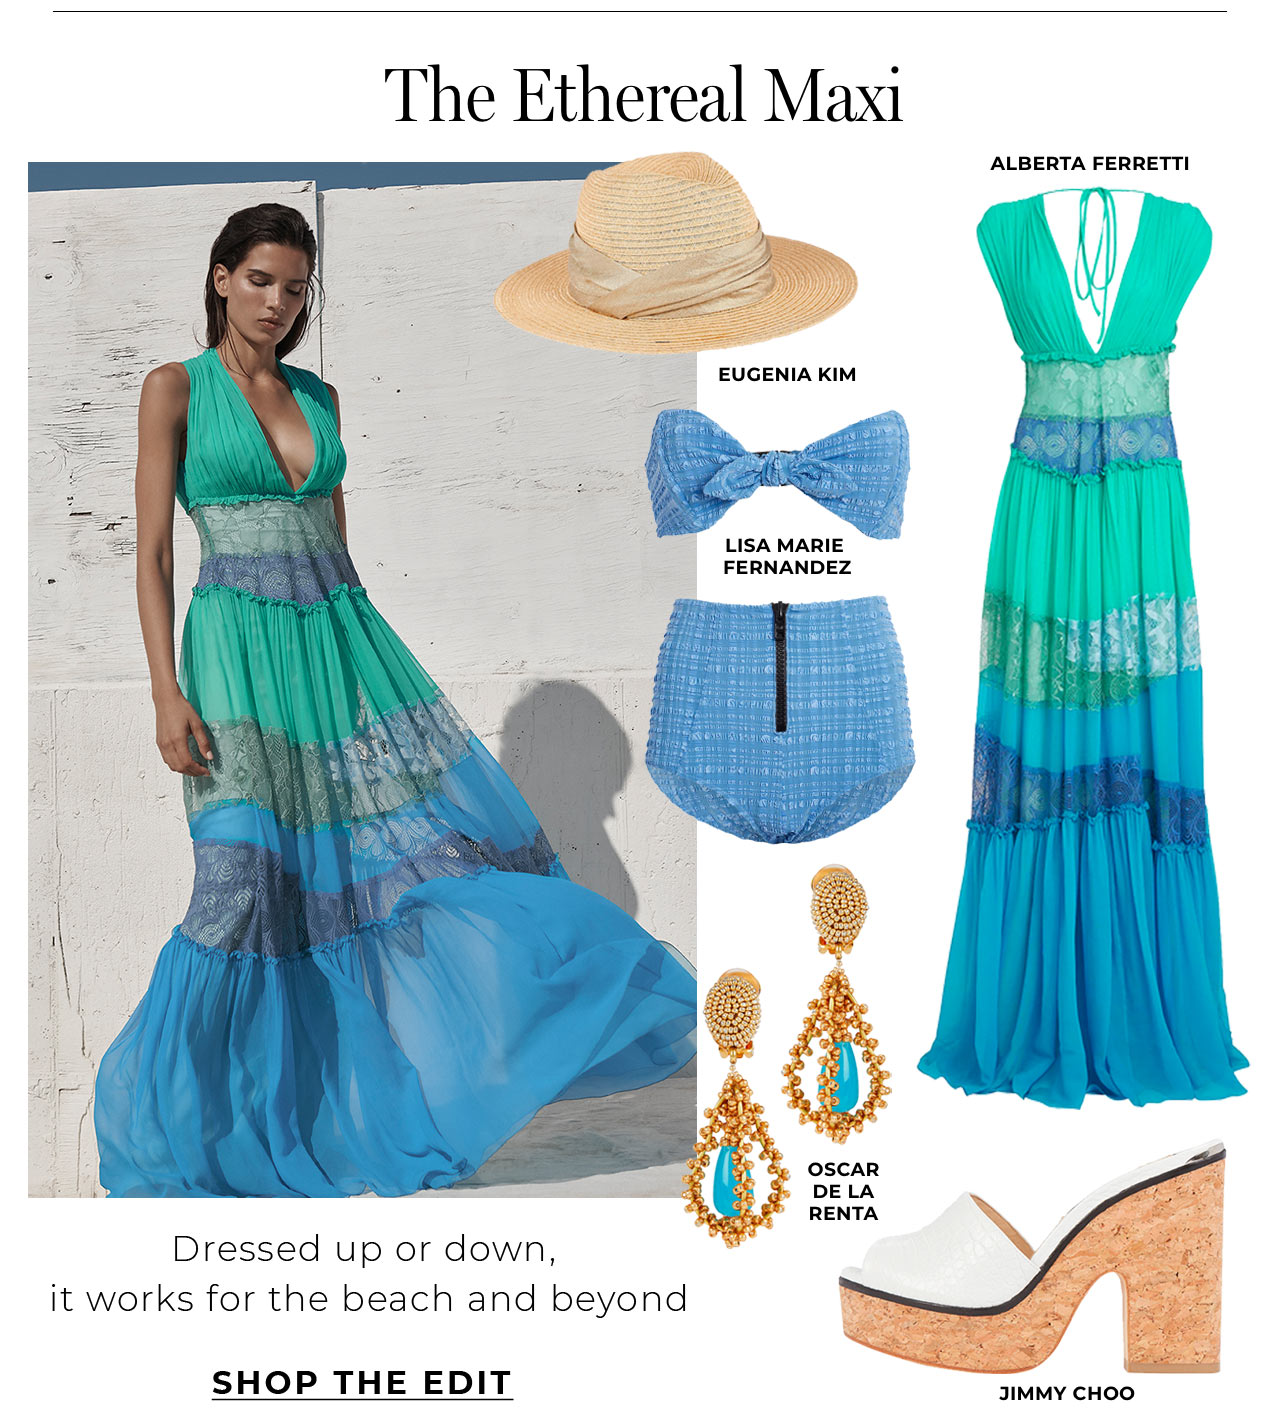 Dressed up or down, the ethereal maxi works for the beach and beyond